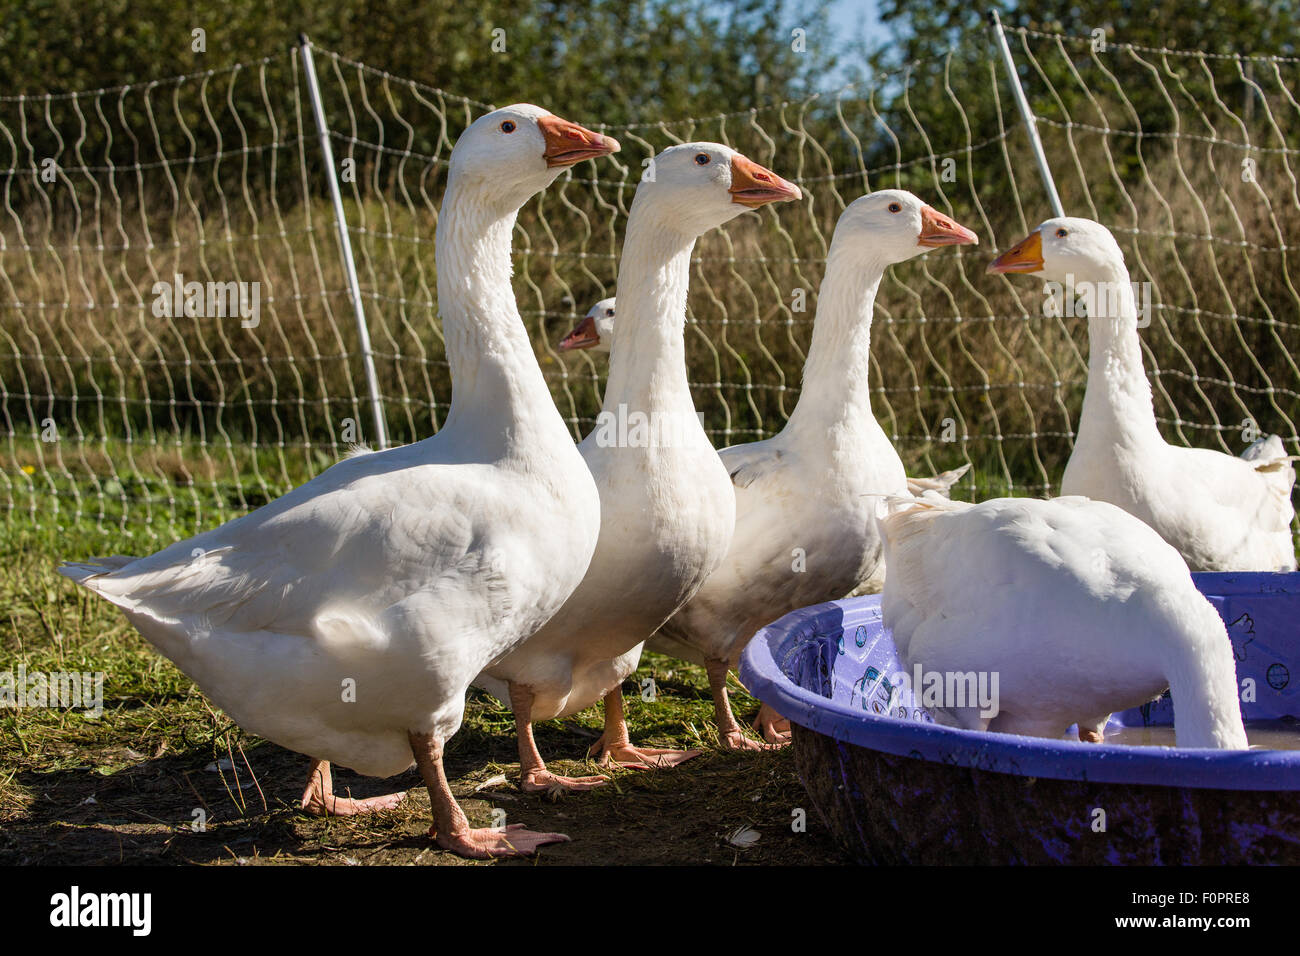 Emden (or Embden) Geese drinking from a wading pool in Carnation, Washington, USA Stock Photo